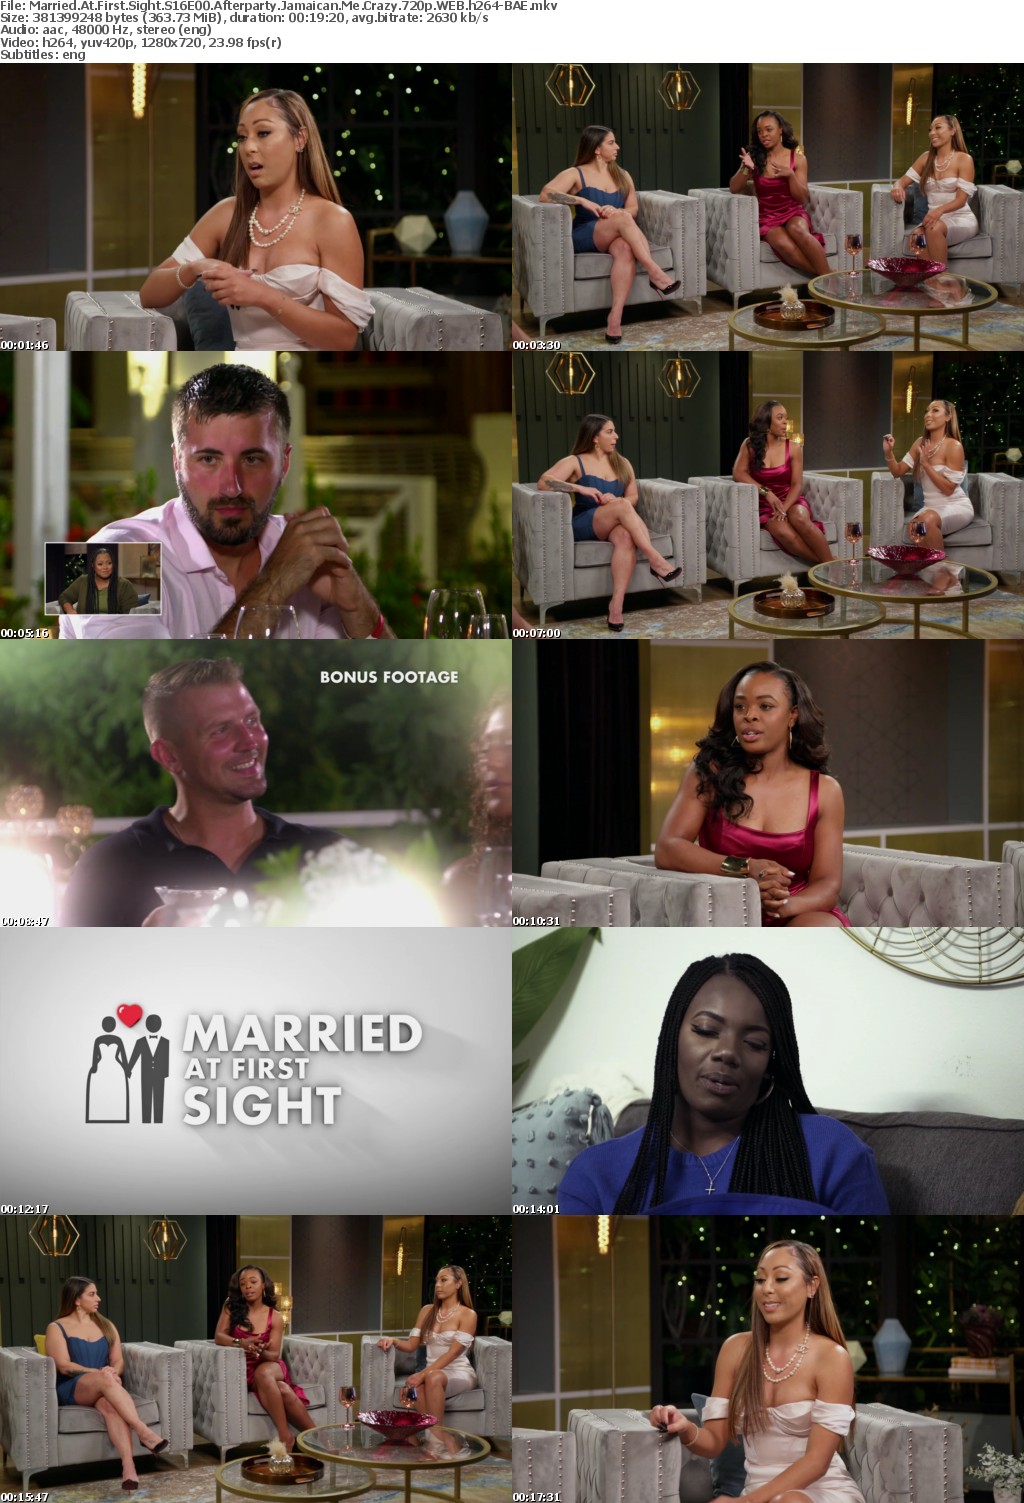 Married At First Sight S16E00 Afterparty Jamaican Me Crazy 720p WEB h264-BAE